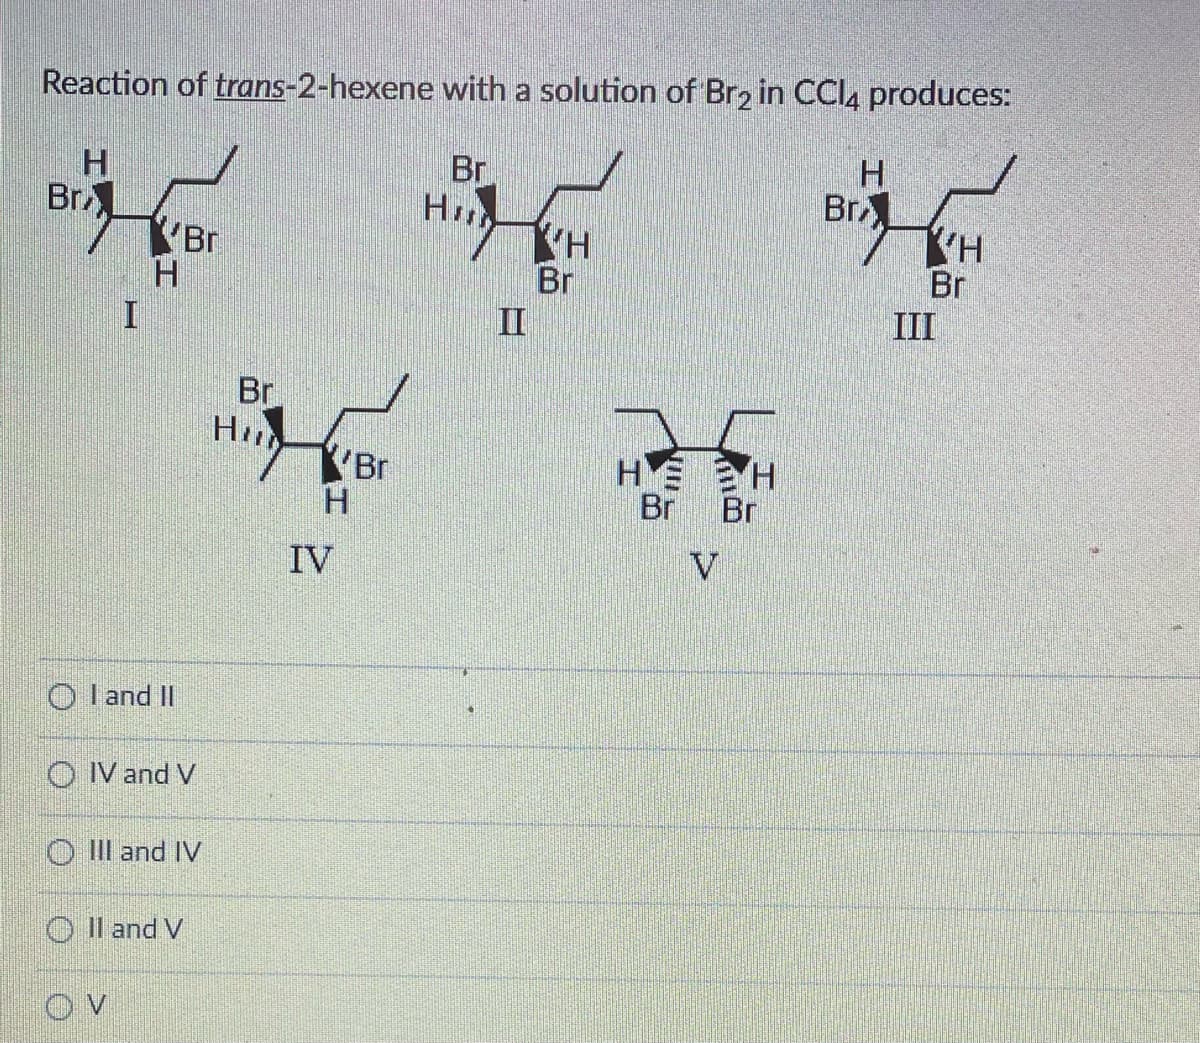 Reaction of trans-2-hexene with a solution of Br2 in CCl4 produces:
Br
Hill
Br
H
OI and II
Br
OIV and V
O III and IV
OV
OII and V
Br
Hil
YBr
H
IV
VH
Br
HE
Br
V
H
Br
H
Br
KH
Br
III